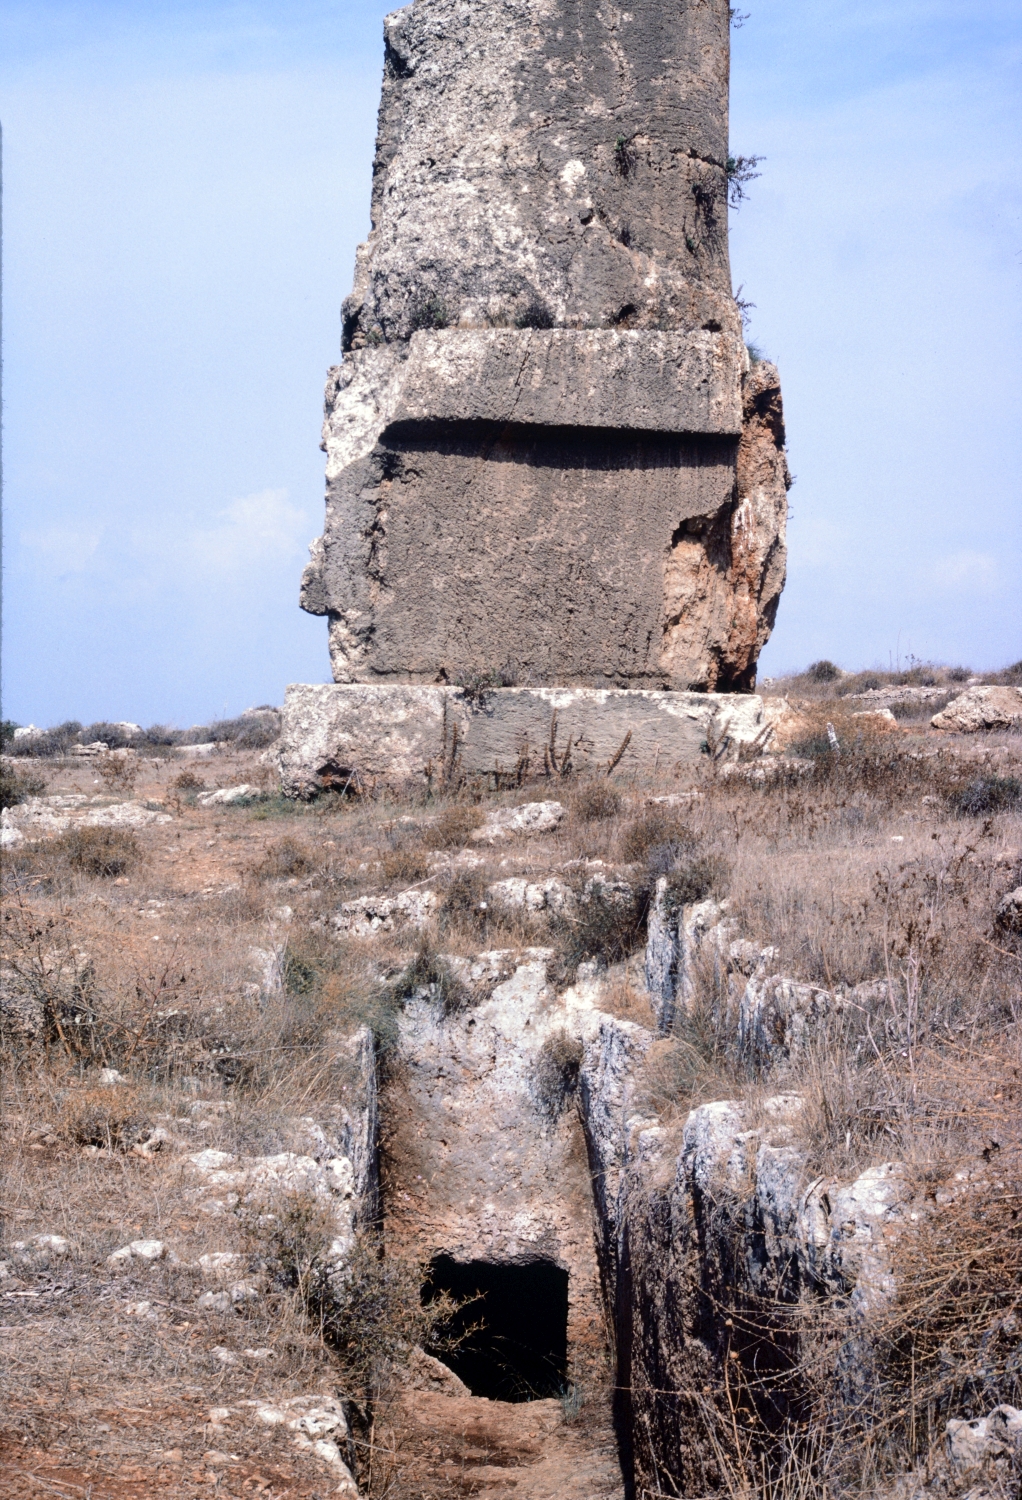 The larger funerary tower, or spindle, detail of the passageway to the burial chamber